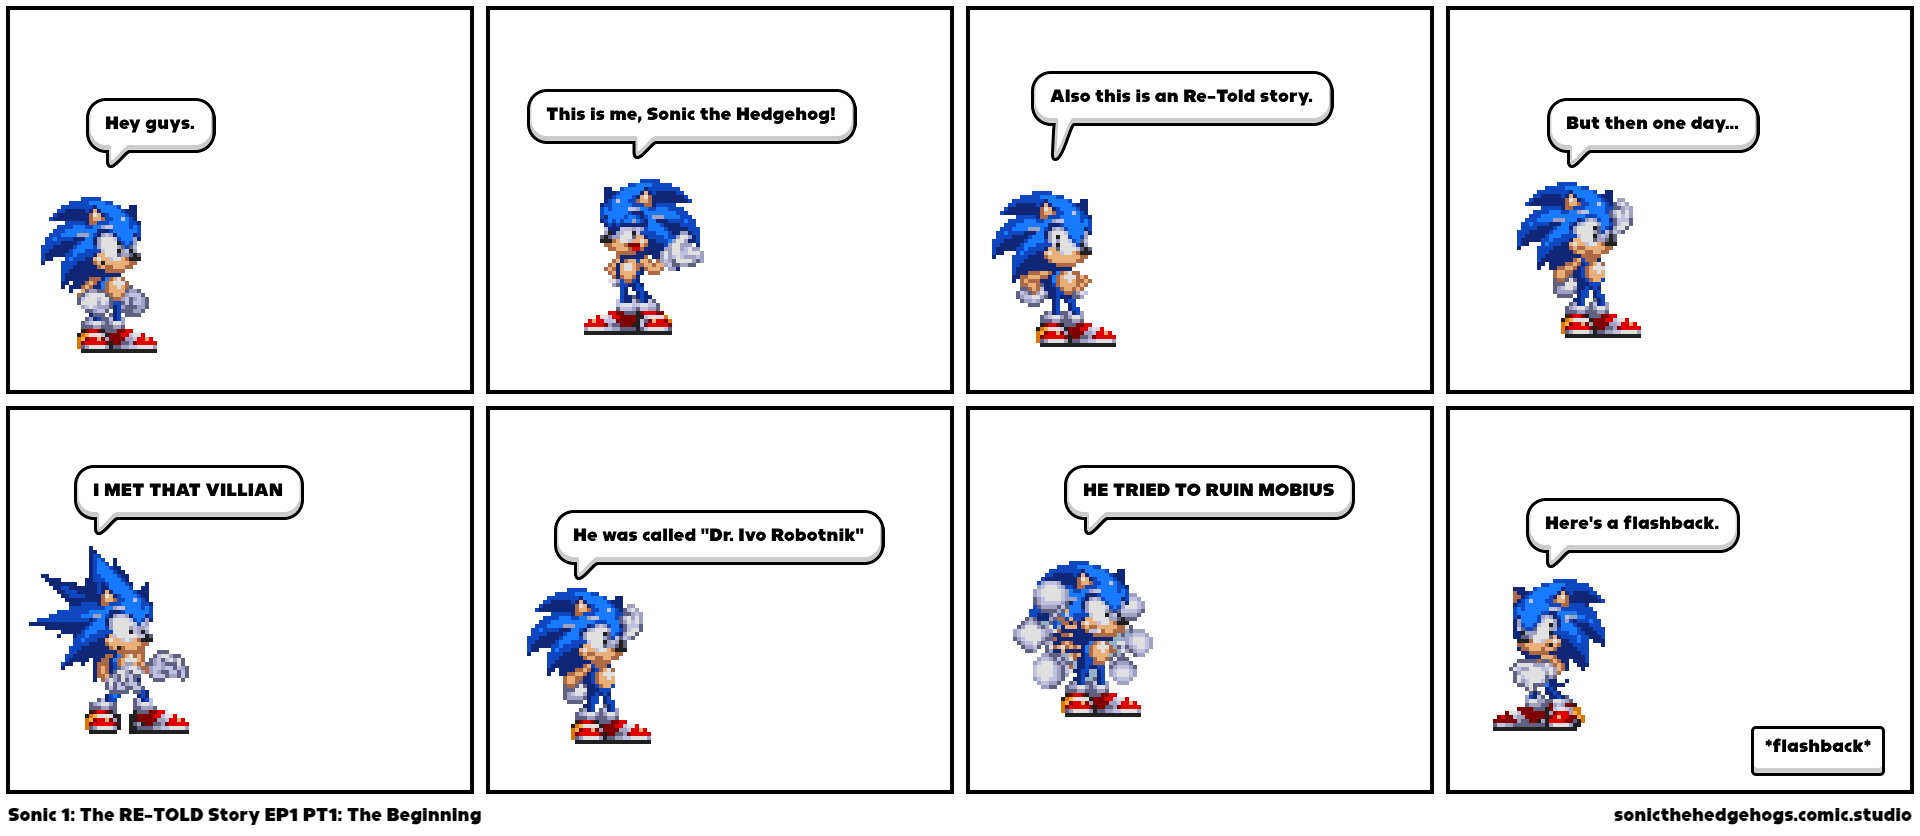 Sonic 1: The RE-TOLD Story EP1 PT1: The Beginning